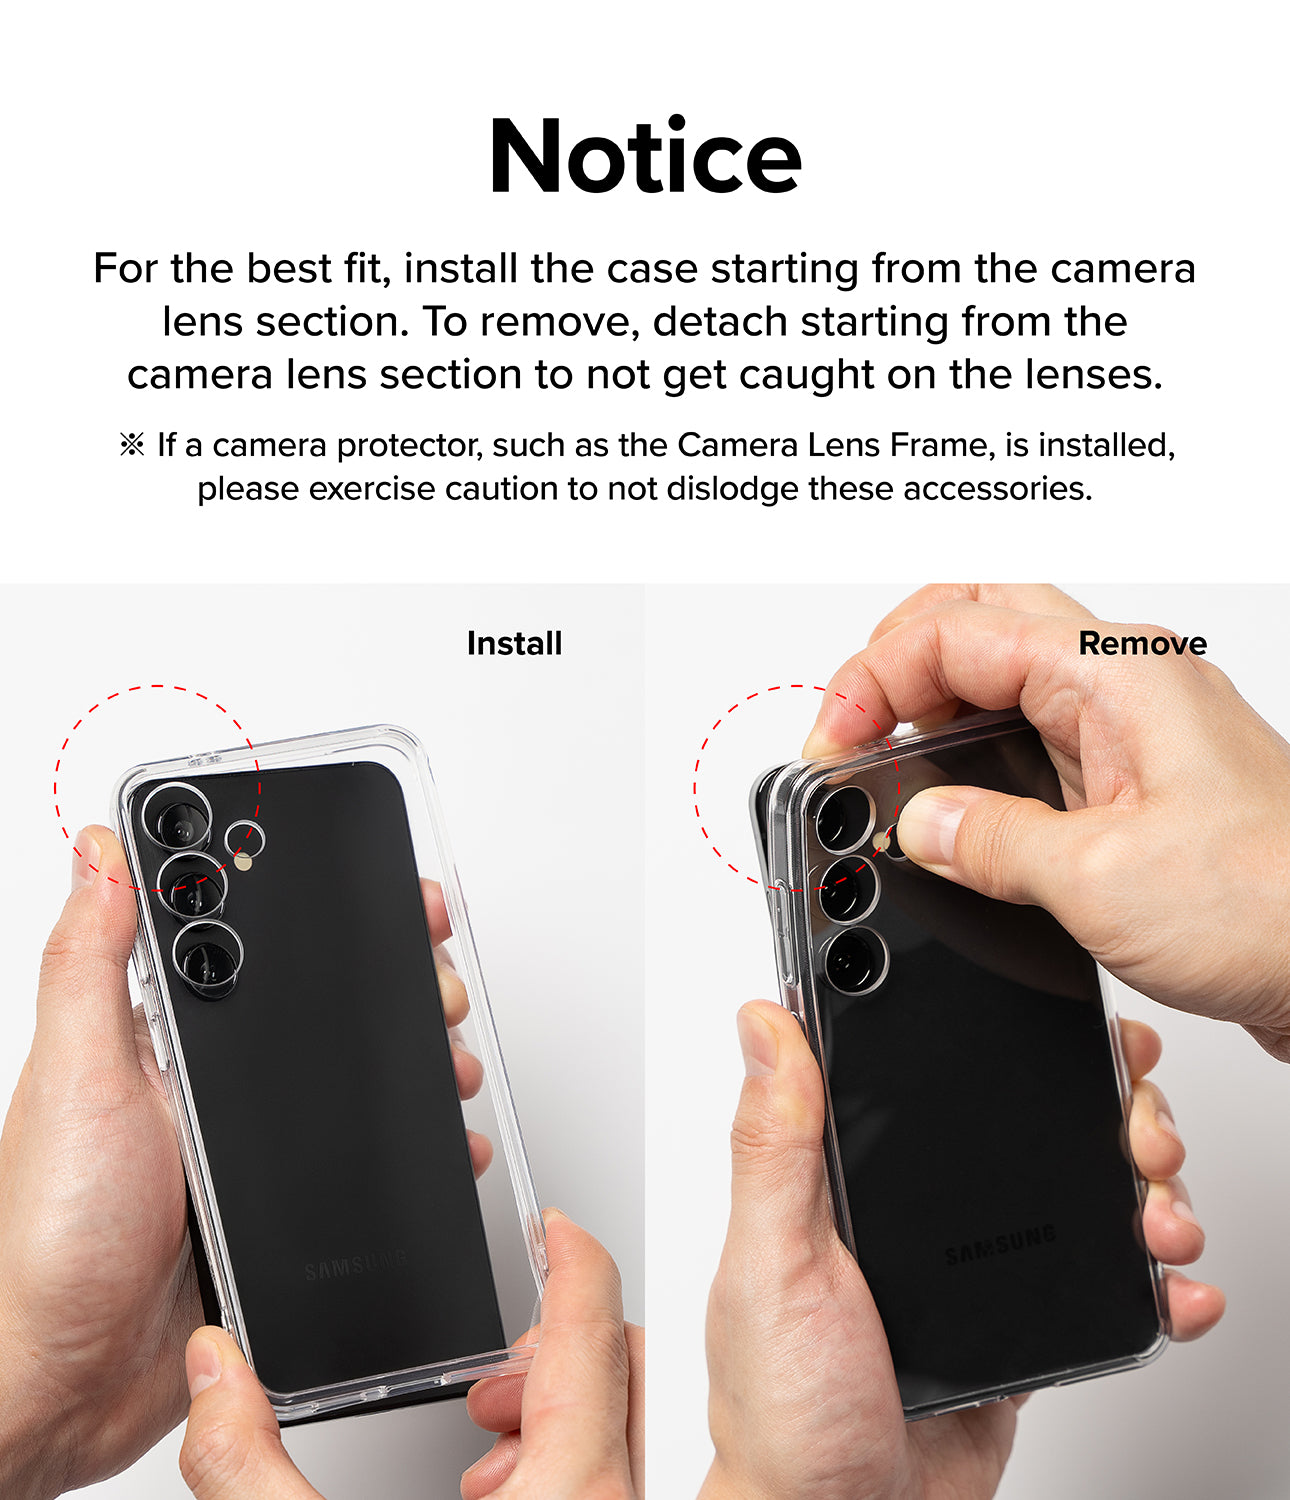 Galaxy S24 Ultra Case | Fusion Design - Seoul - Notice. For the best fit, install the case starting from the camera lens section. To remove, detach starting from the camera lens section to not get caught on the lenses.